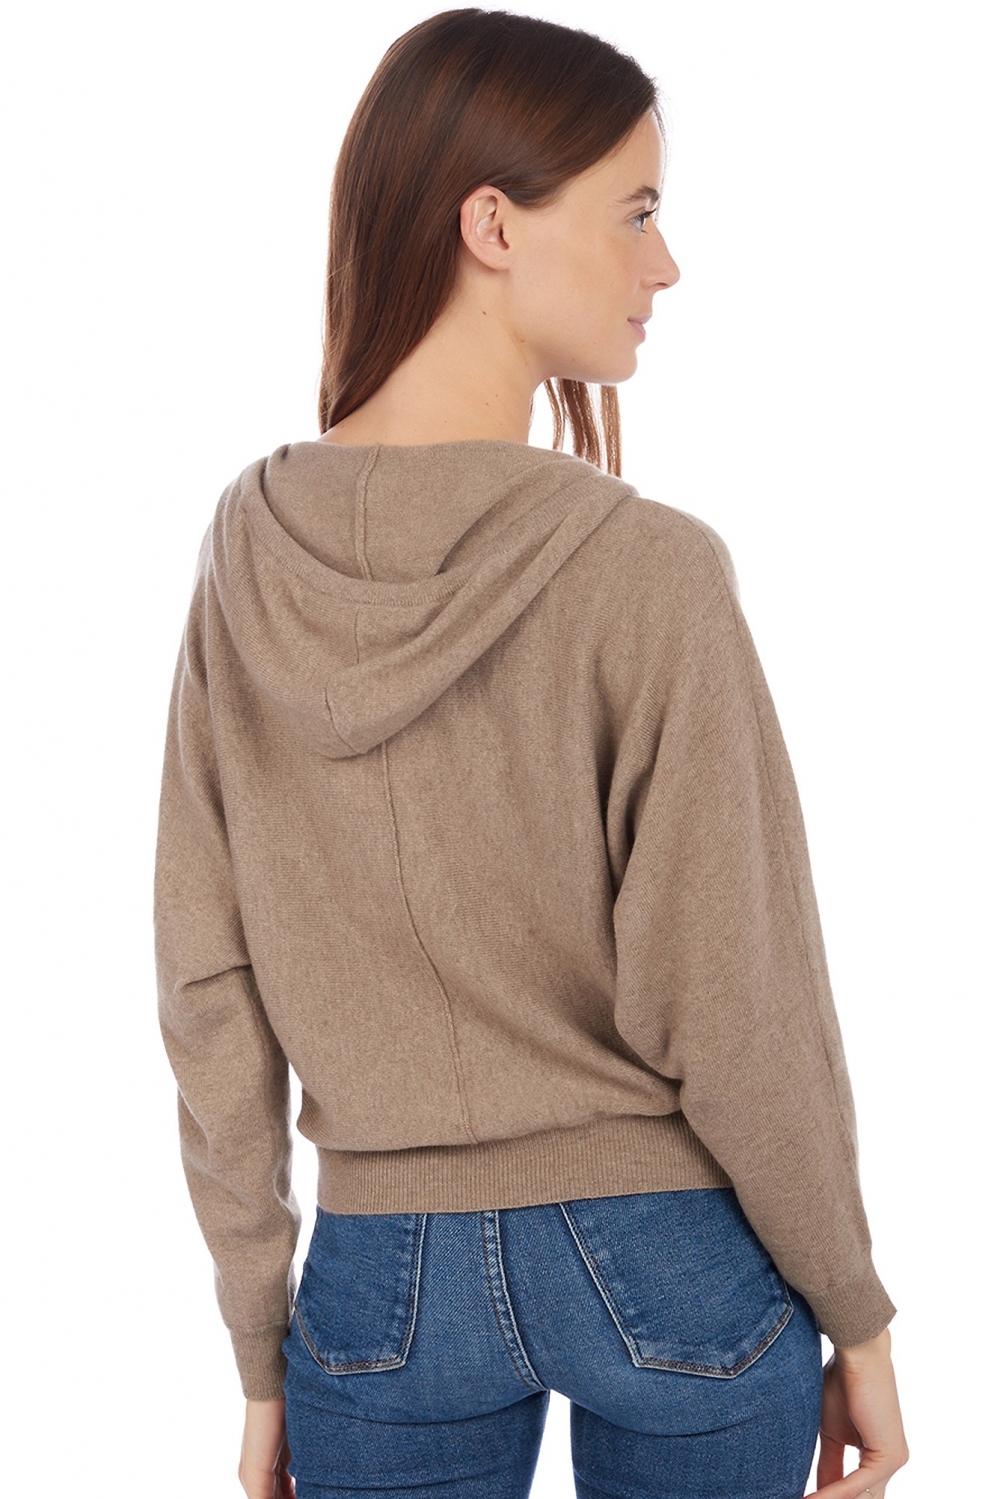 Cachemire pull femme aast natural brown m